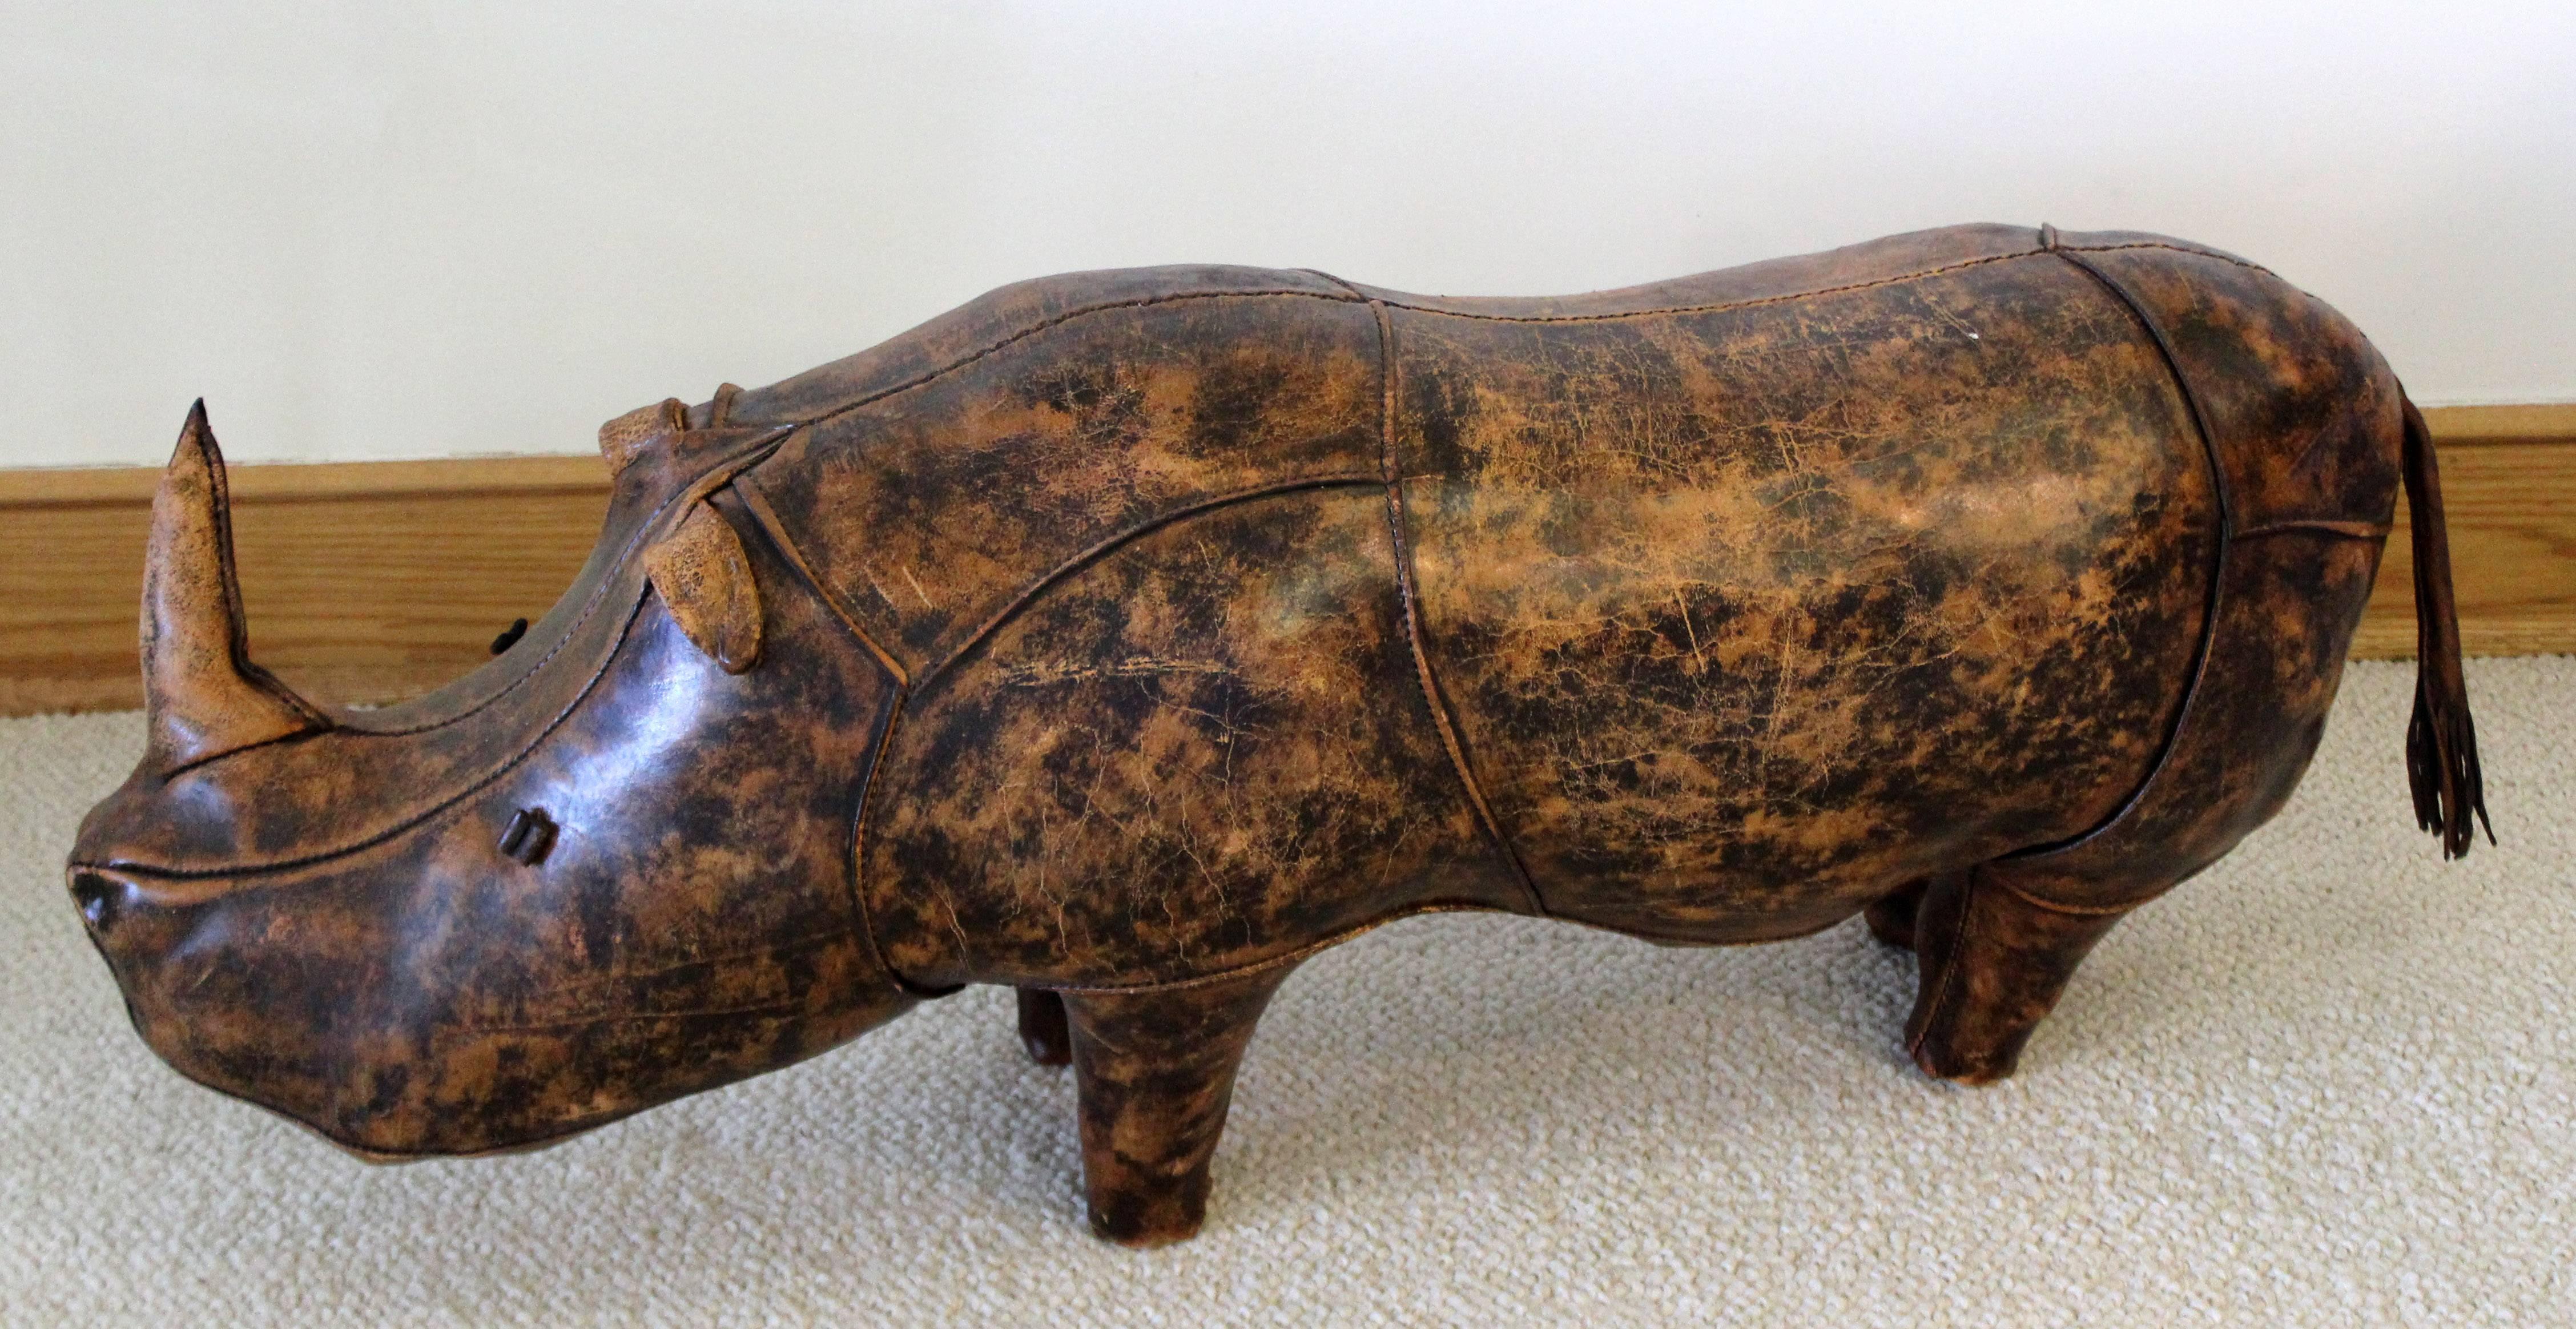 For your consideration is a stuffed, hand-stitched leather footstool, in the whimsical shape of a rhino, from a 1960s series that Abercrombie & Fitch had commissioned from the British company Omersa. In excellent condition, with a gorgeous patina.